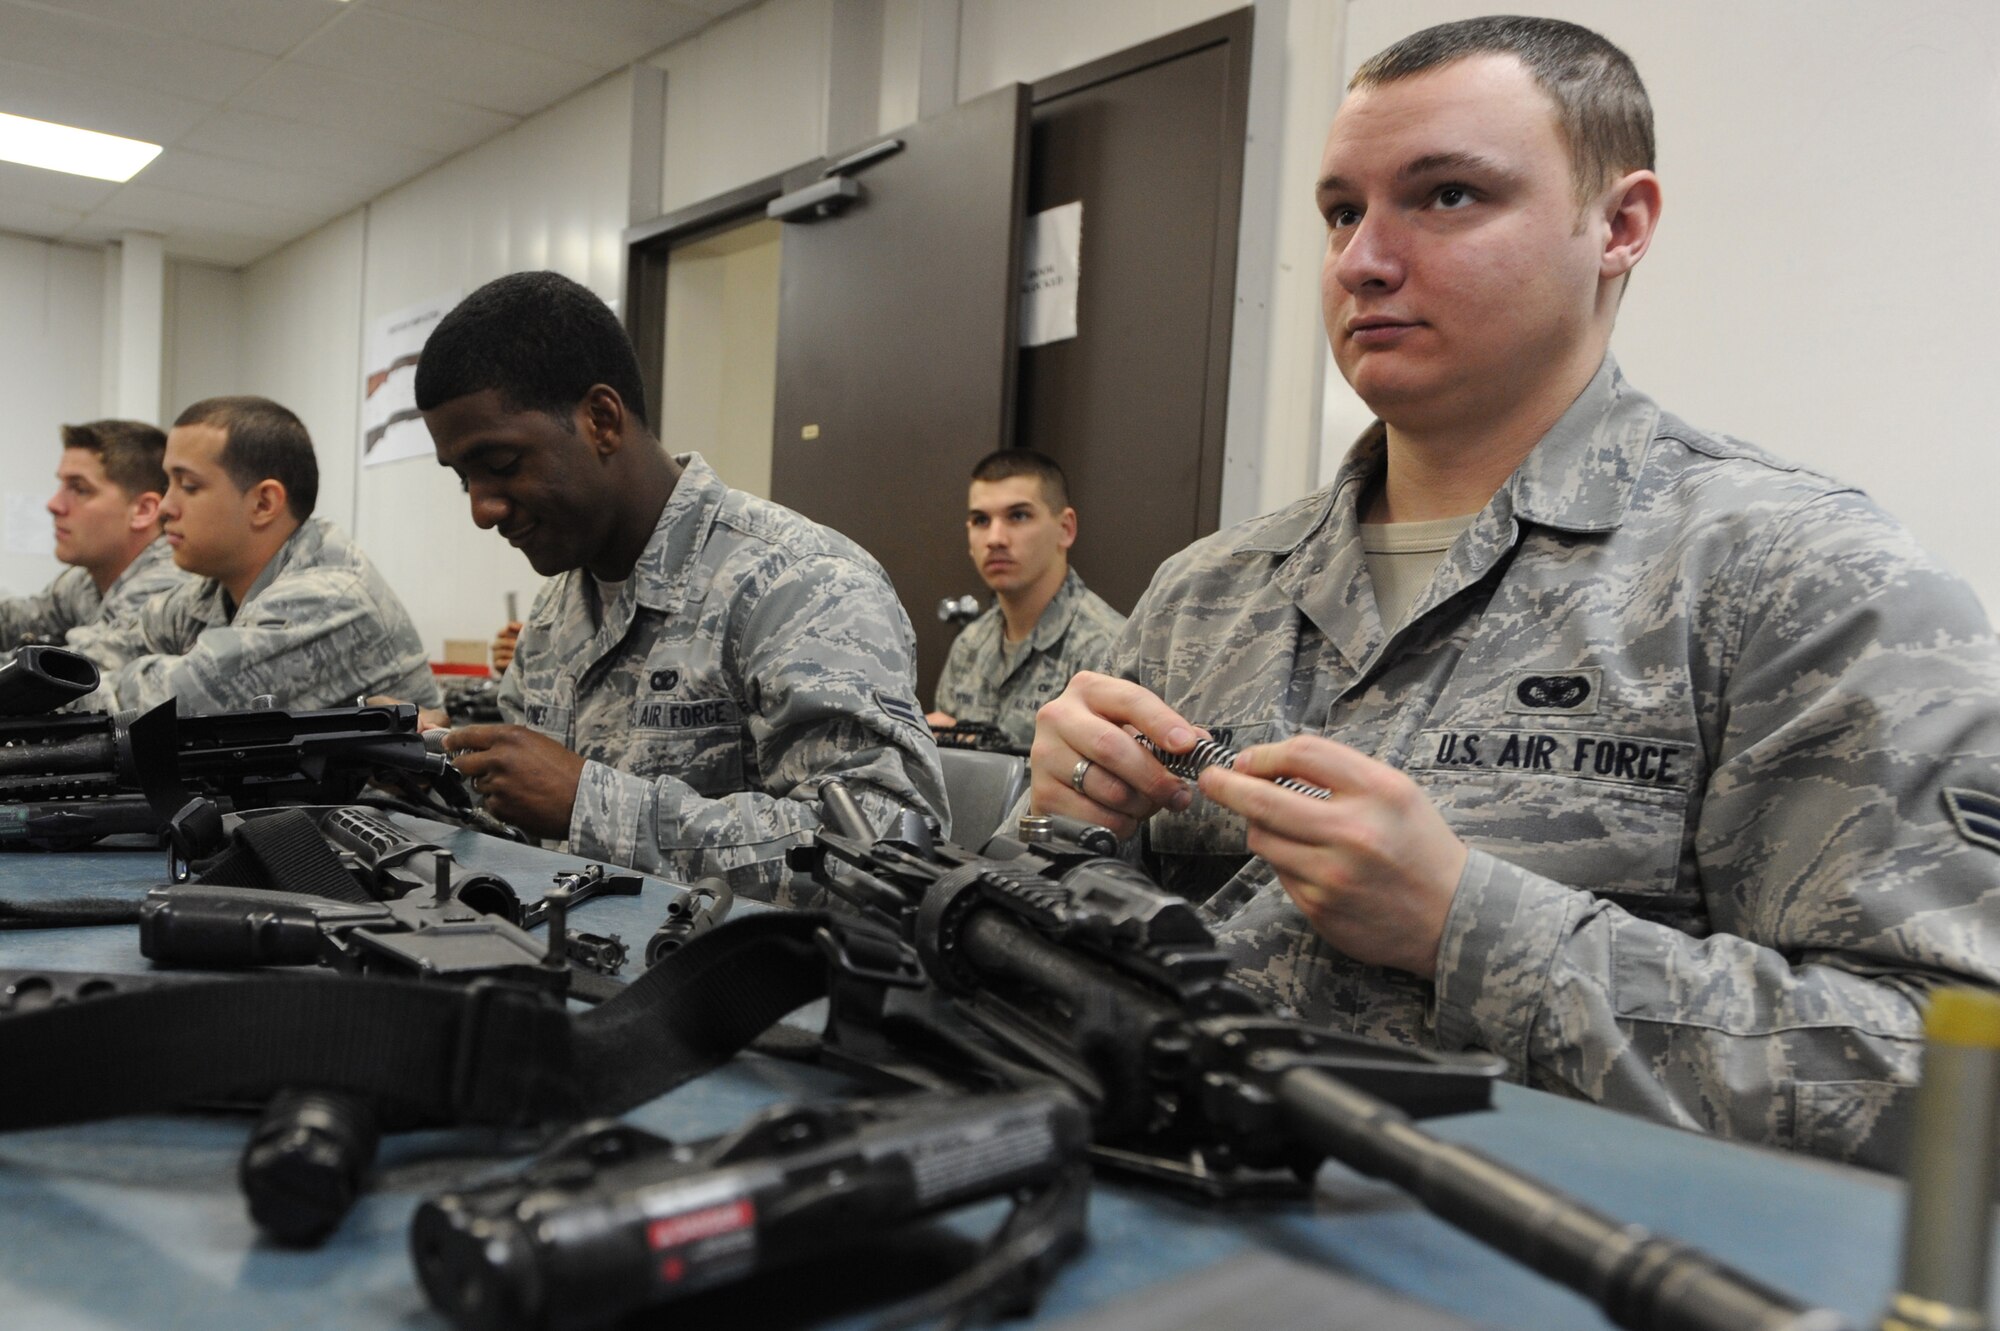 WHITEMAN AIR FORCE BASE, Mo. -  Airman 1st Class Scott Maynard, 509th  Security Forces Squadron patrolman, listens to the combat arms instructor while the disassembling his M-4 carbine here, March 16, 2010.(U.S. Air Force photo by Airman 1st Class Carlin Leslie )(Released)
 








